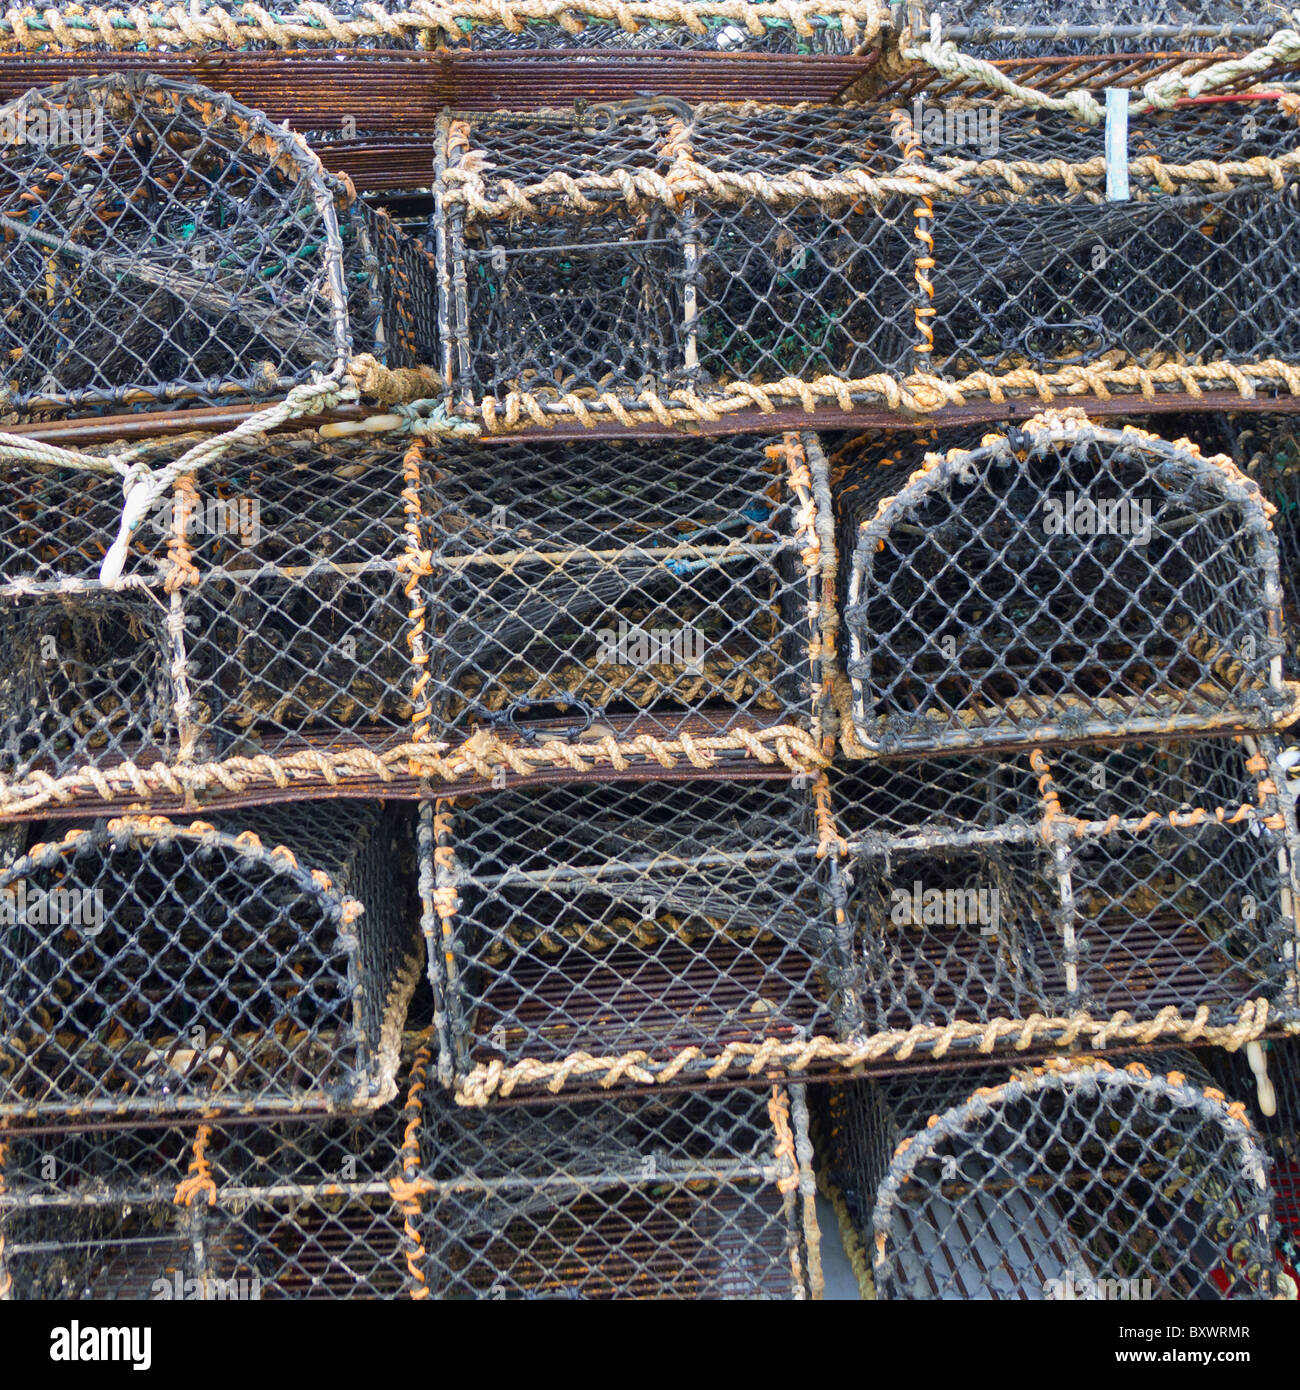 Lobster pots stacked up at Brancaster Staithe on the Norfolk coast. Stock Photo